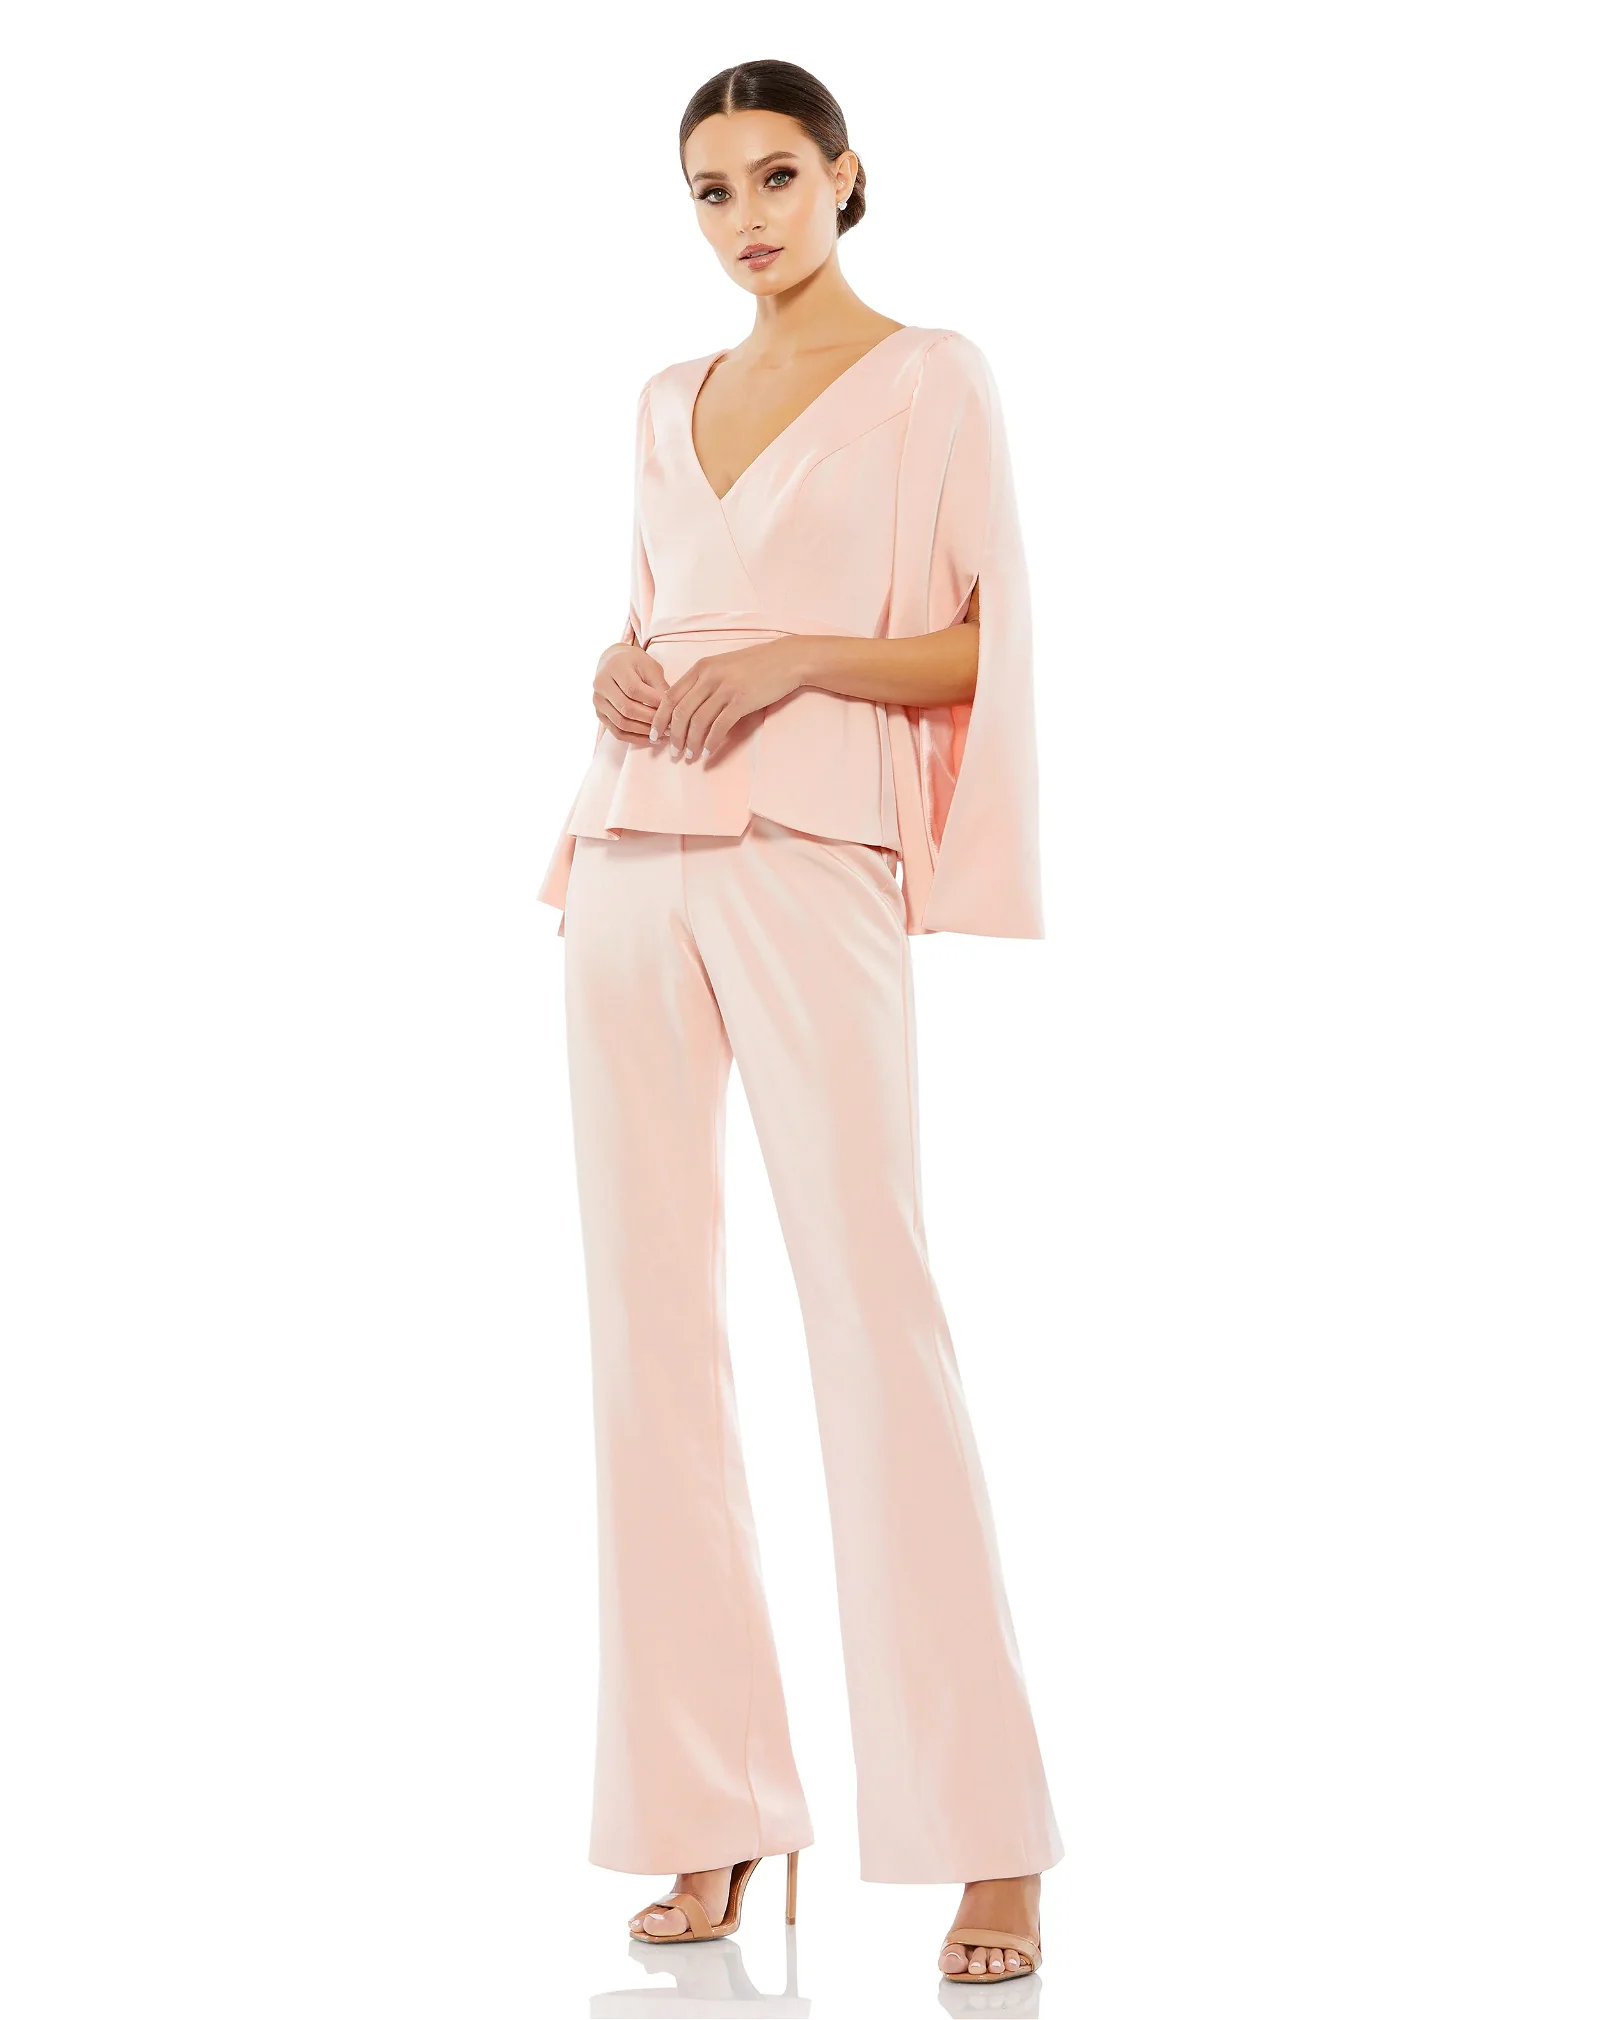 Image of Long Sleeve Two Piece Crepe Pant Suit